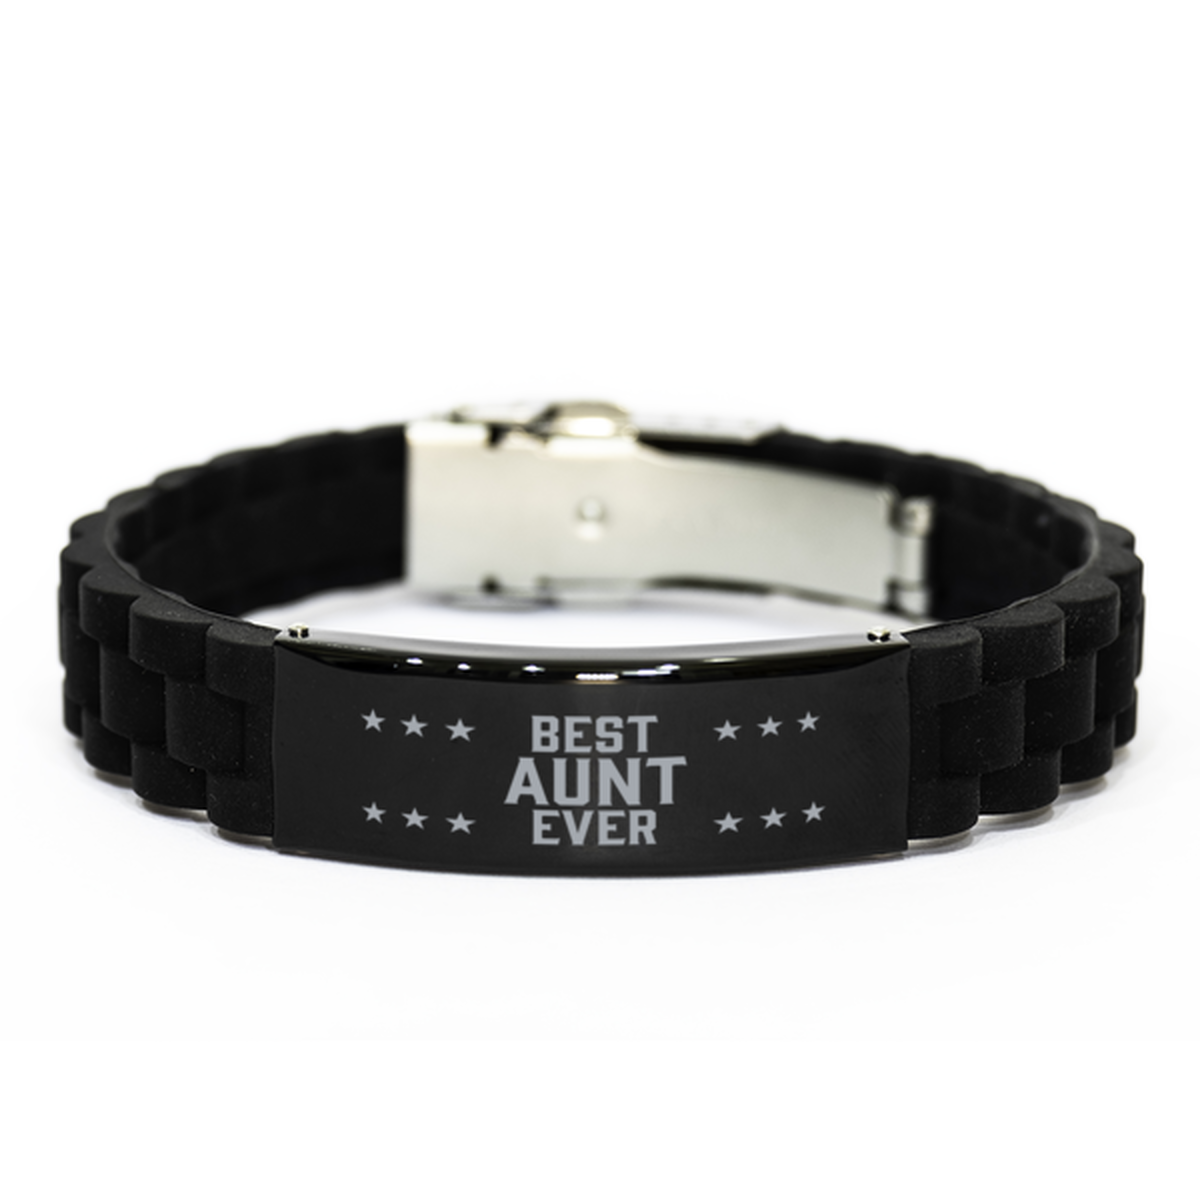 Best Aunt Ever Aunt Gifts, Funny Black Engraved Bracelet For Aunt, Family Gifts For Women